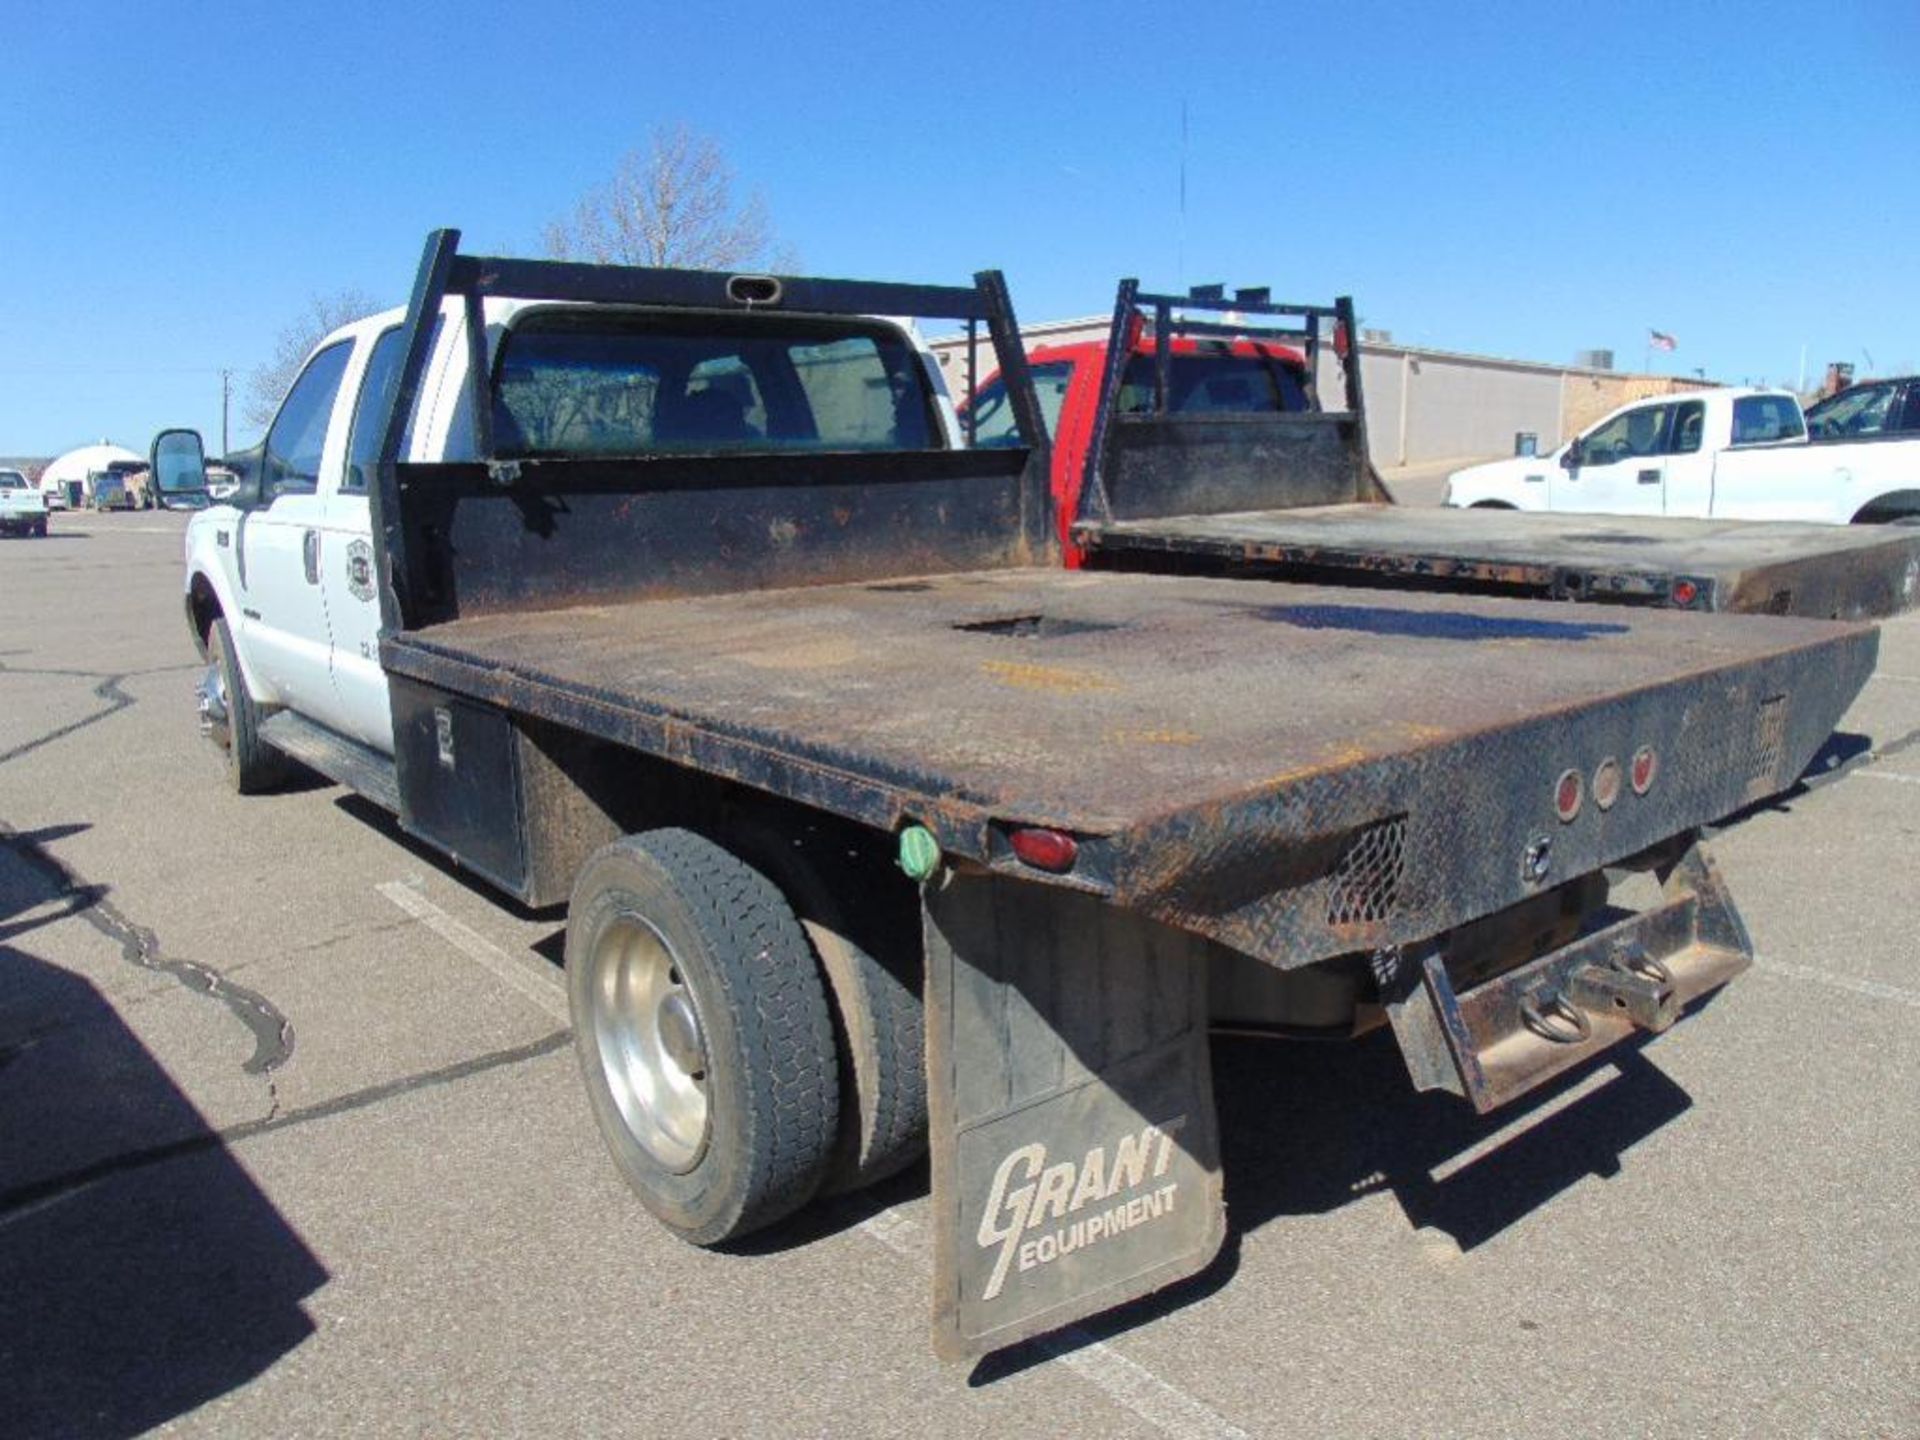 2001 Ford F450 Crewcab Flatbed s/n 1fdxw46f81ec38467, 7.3 diesel eng, auto trans, od reads 265046 - Image 2 of 7